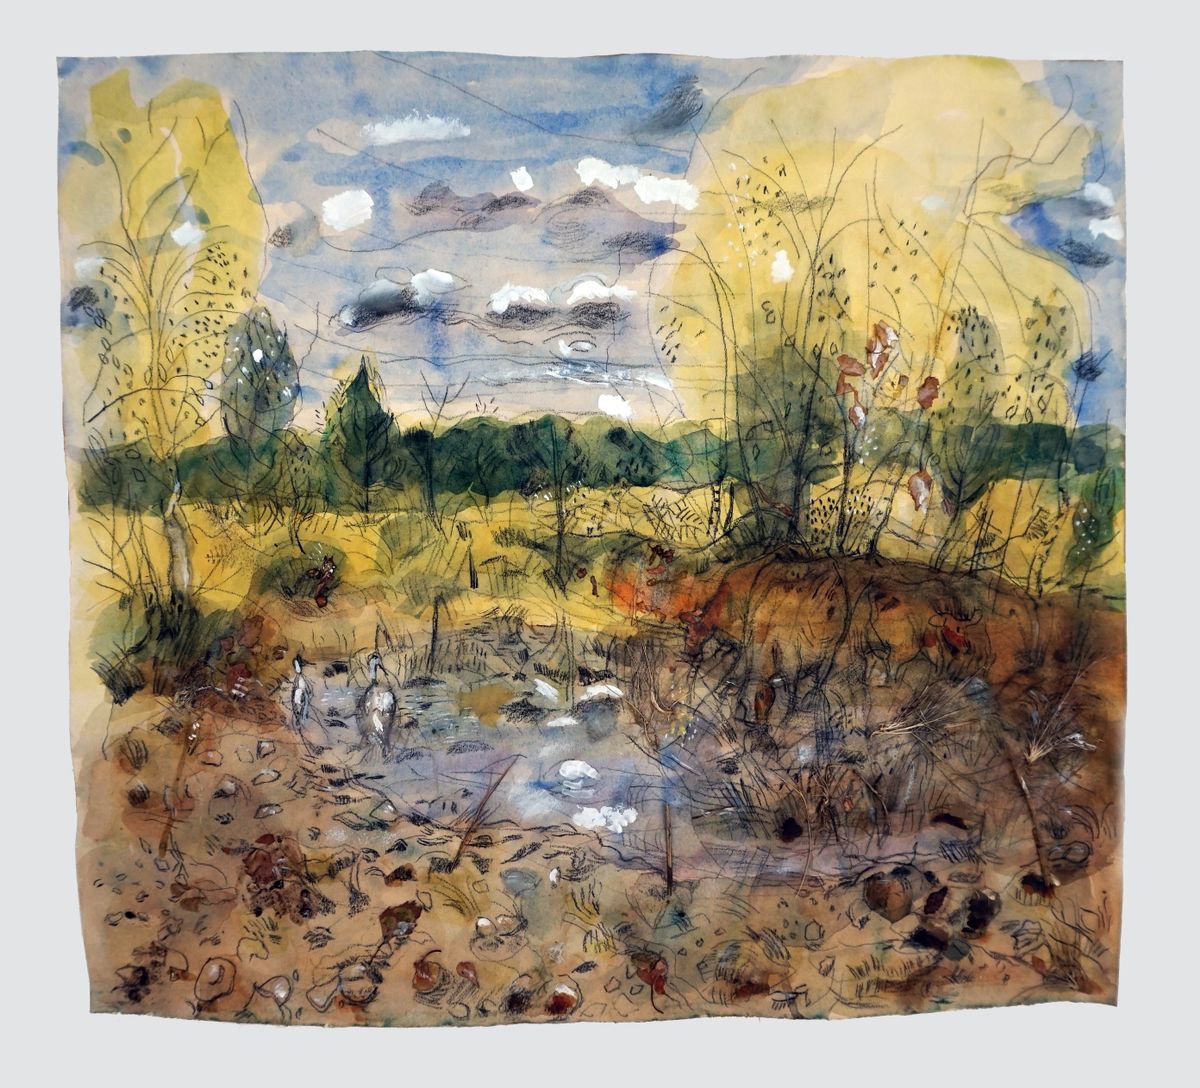 Lowland Heath water hole, herons and barren cows by Patrick O’Callaghan